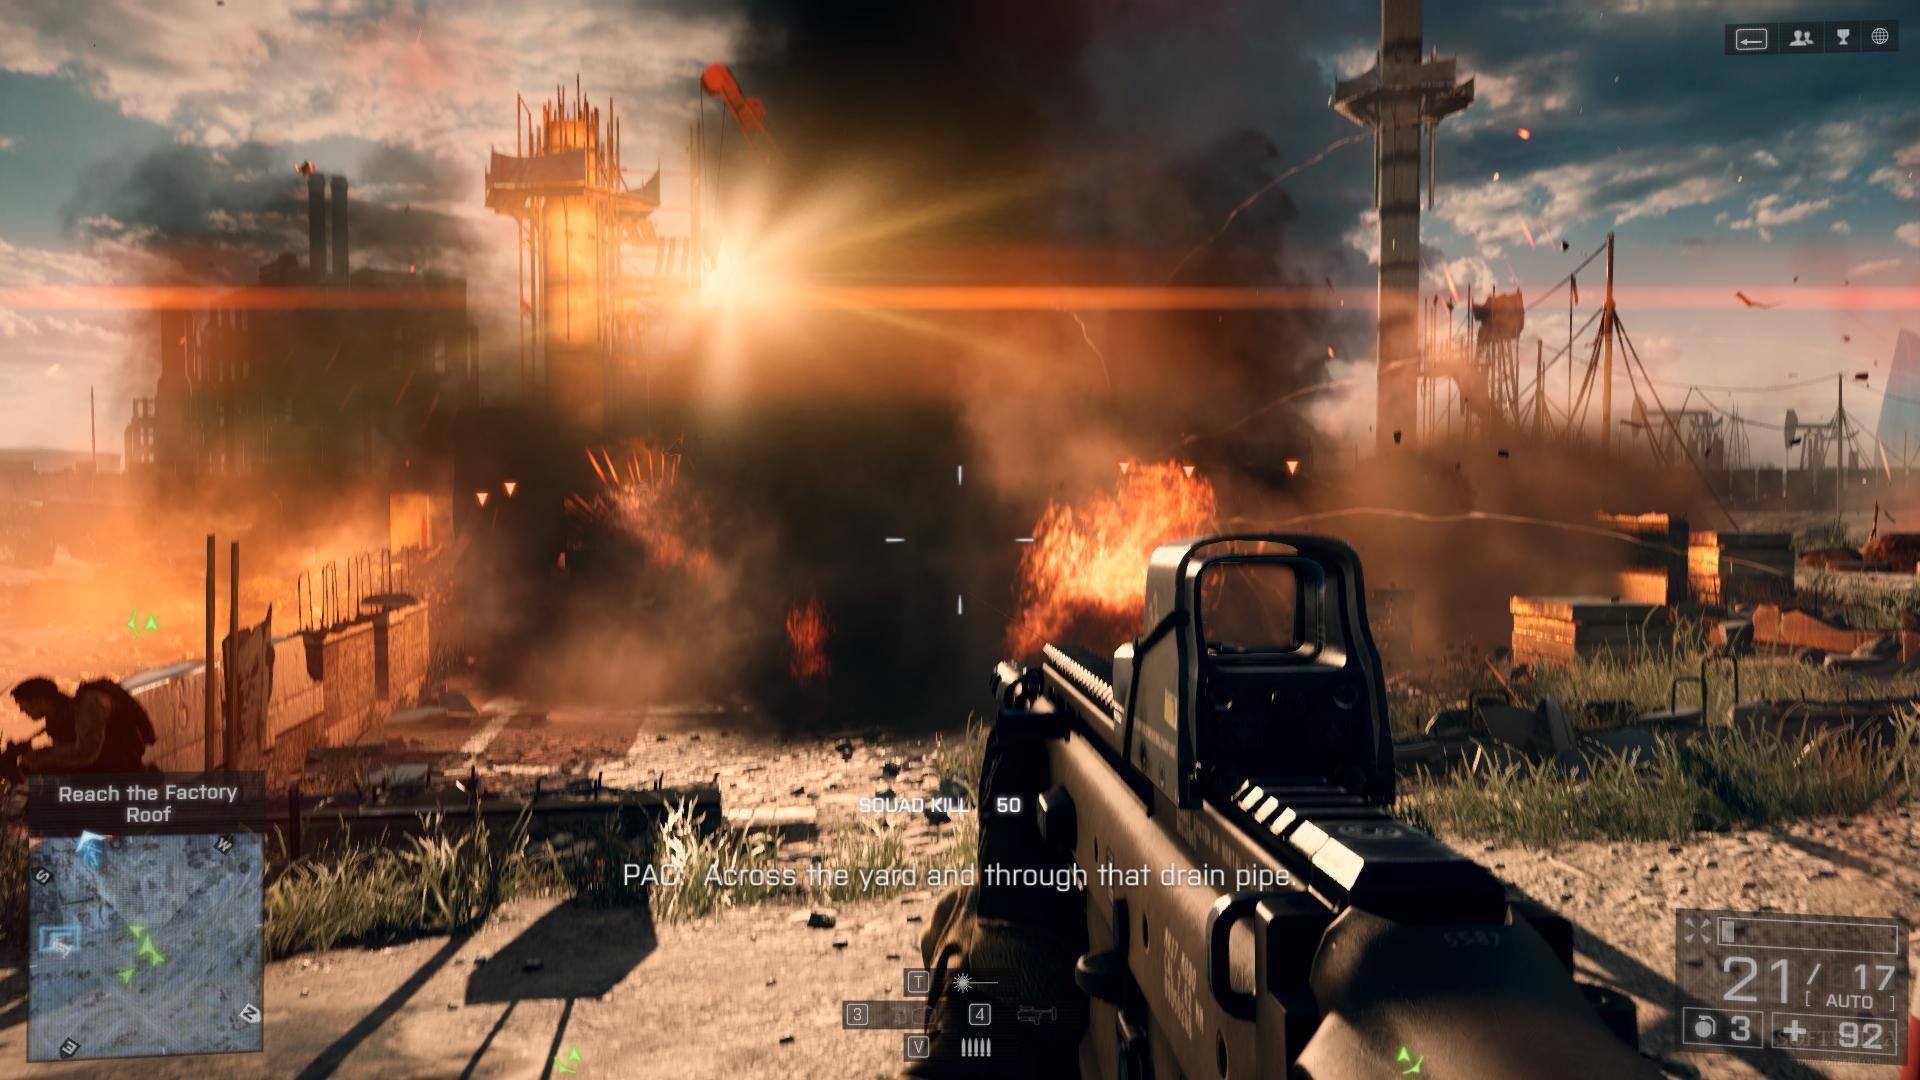 Battlefield 4 Multiplayer On Pc Goes Offline In Preparation For New Patch